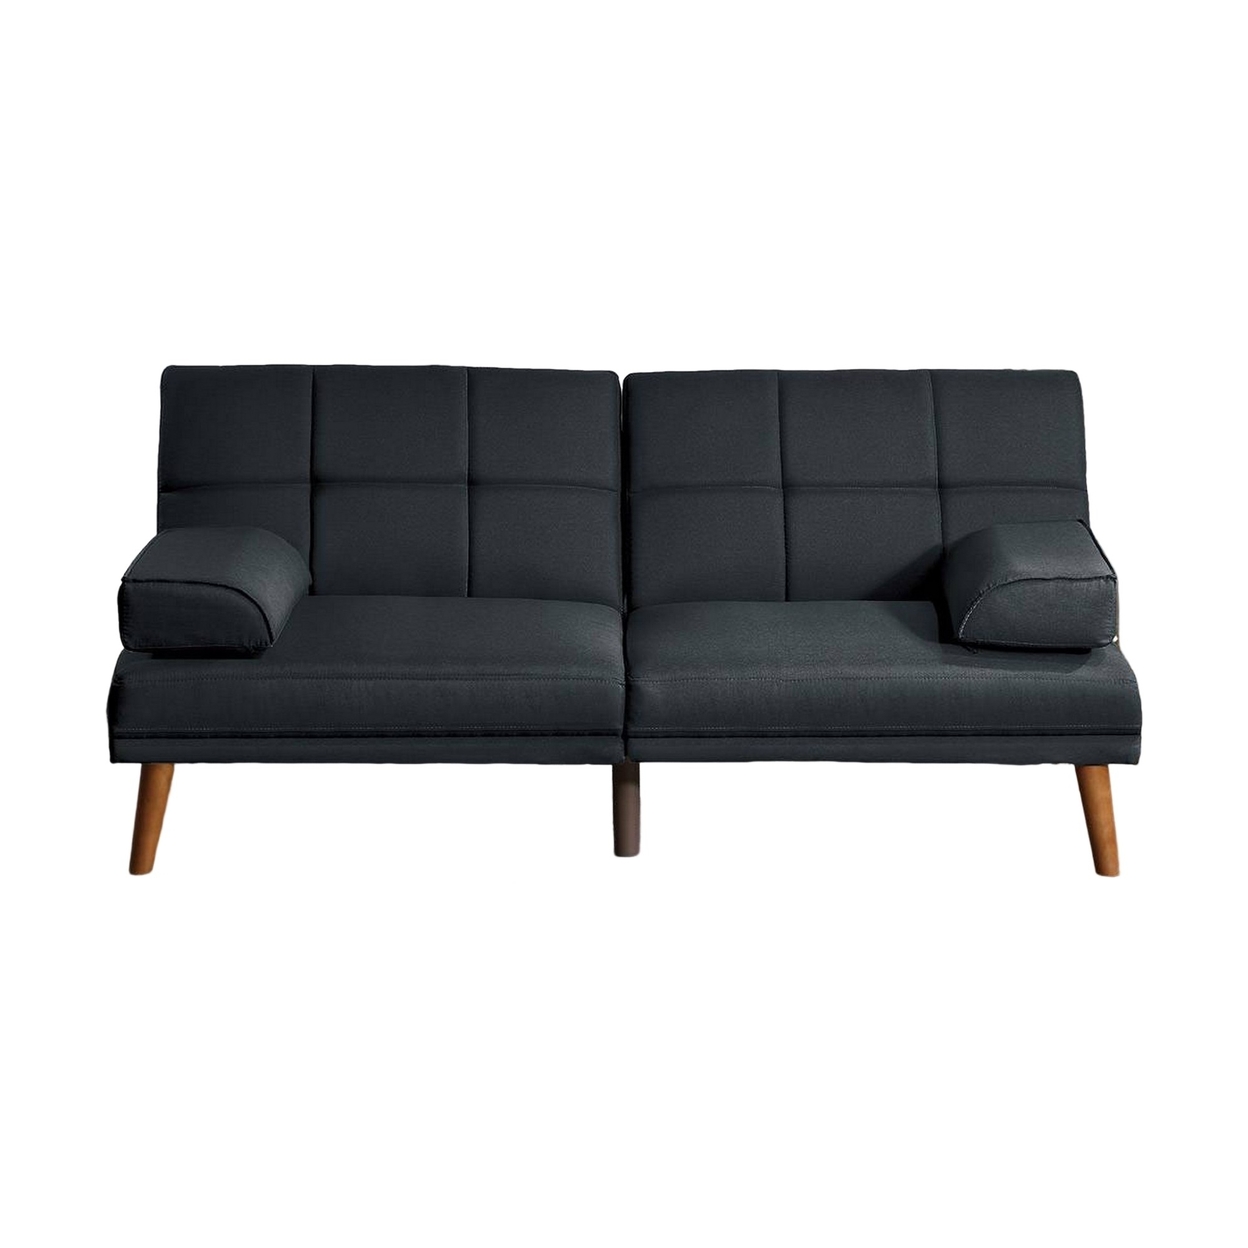 Gina 71 Inch Adjustable Futon Sofa Bed, Square Tufted, Tapered Legs, Black